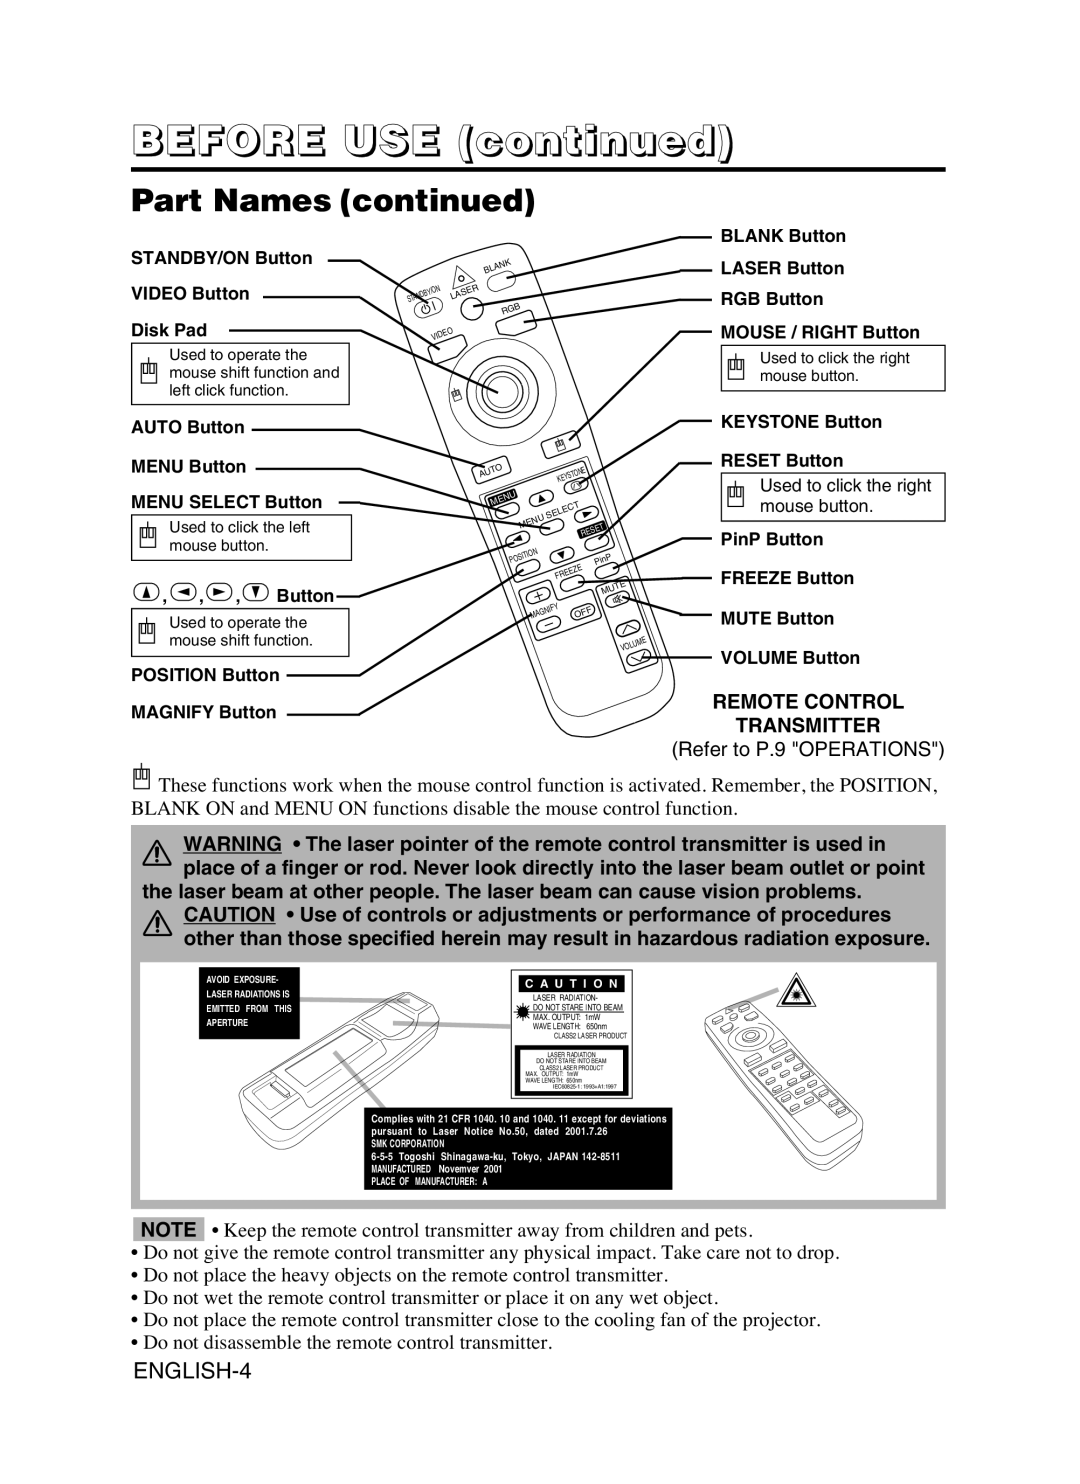 Dukane 8053 user manual Part Names continued, BEFORE USE continued, ENGLISH-4 